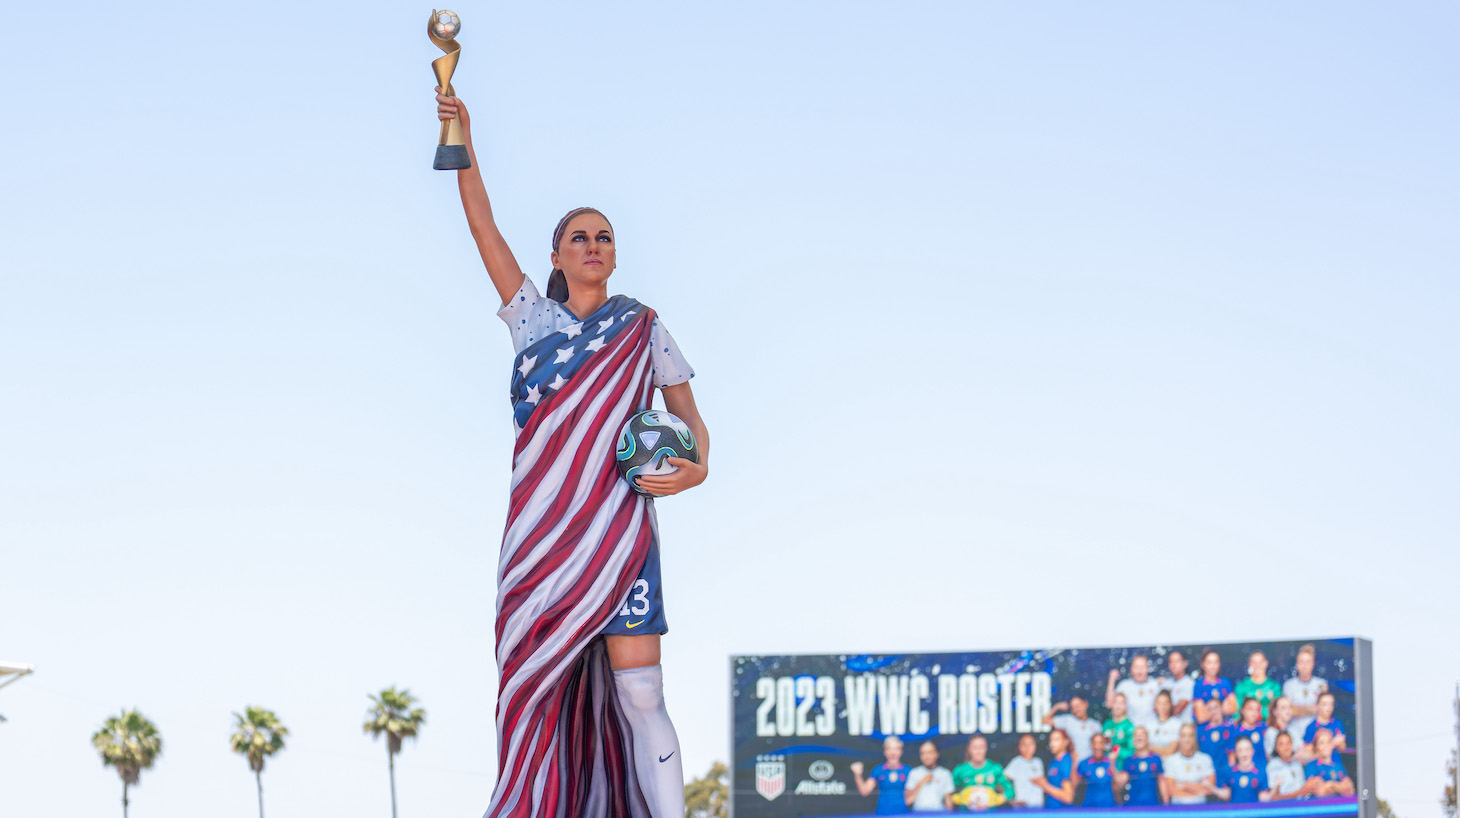 A statue of Alex Morgan of the United States dressed as the Statue of Liberty.